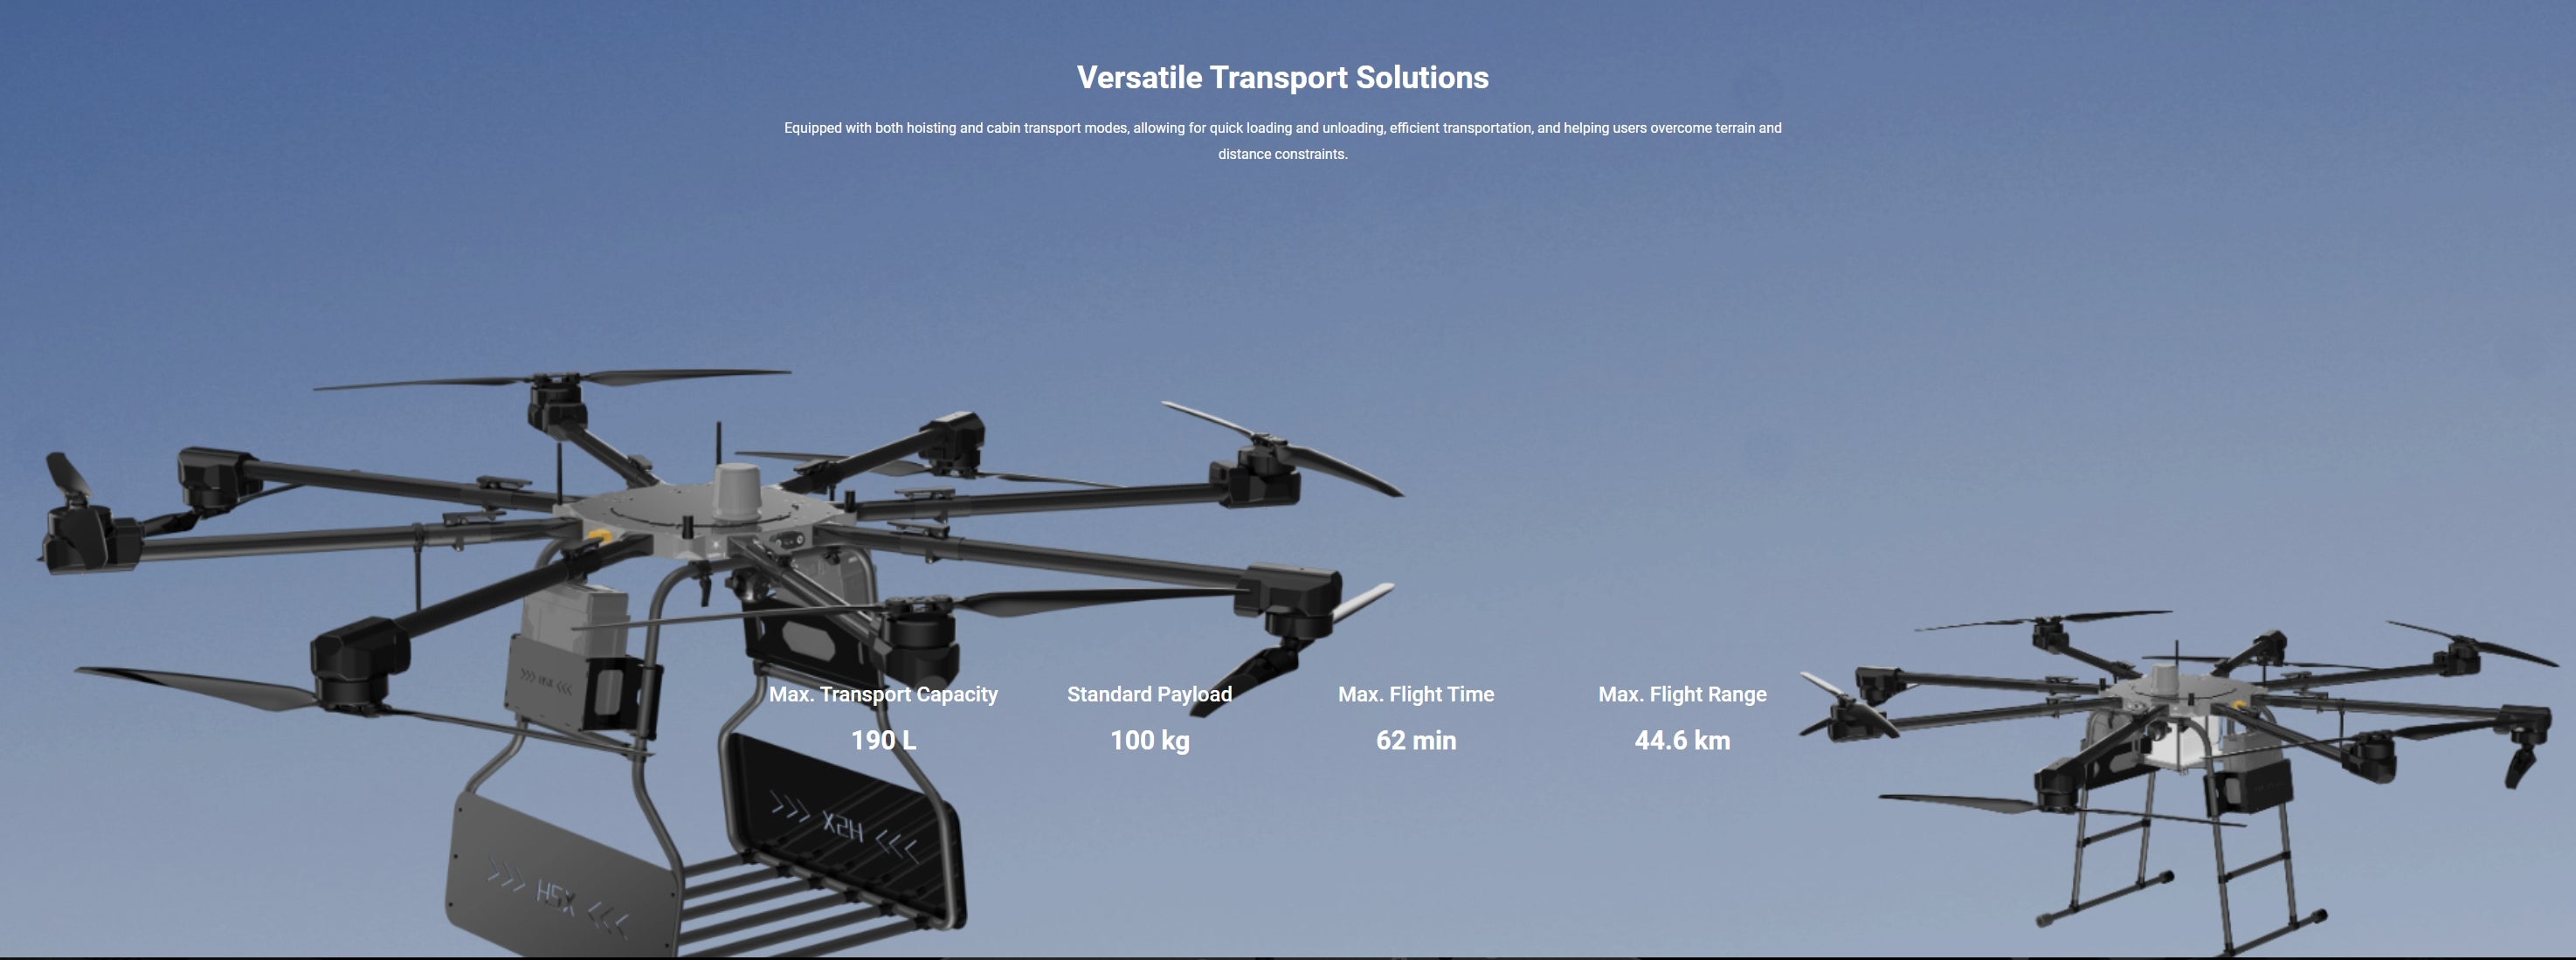 H200 Agricultural / Transport Drone, Transport Solutions Equipped with both hoisting and cabin transport modes, allowing for quick loading